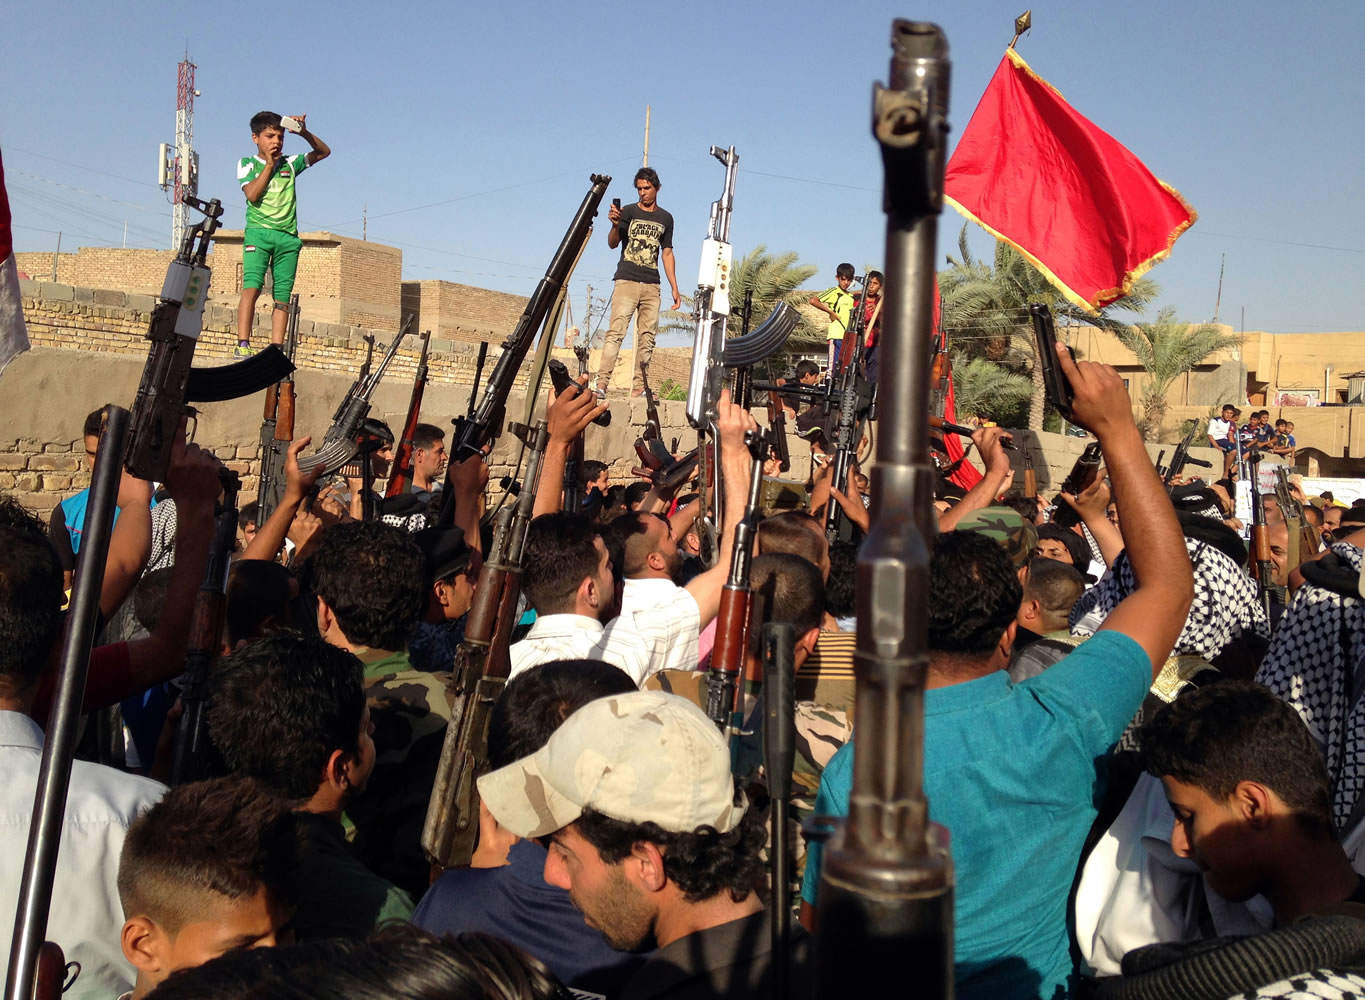 Shiite tribal fighters raise their weapons and chant slogans against the al-Qaida-inspired Islamic State of Iraq and the Levant on Sunday in the east Baghdad neighborhood of Kamaliya, Iraq.